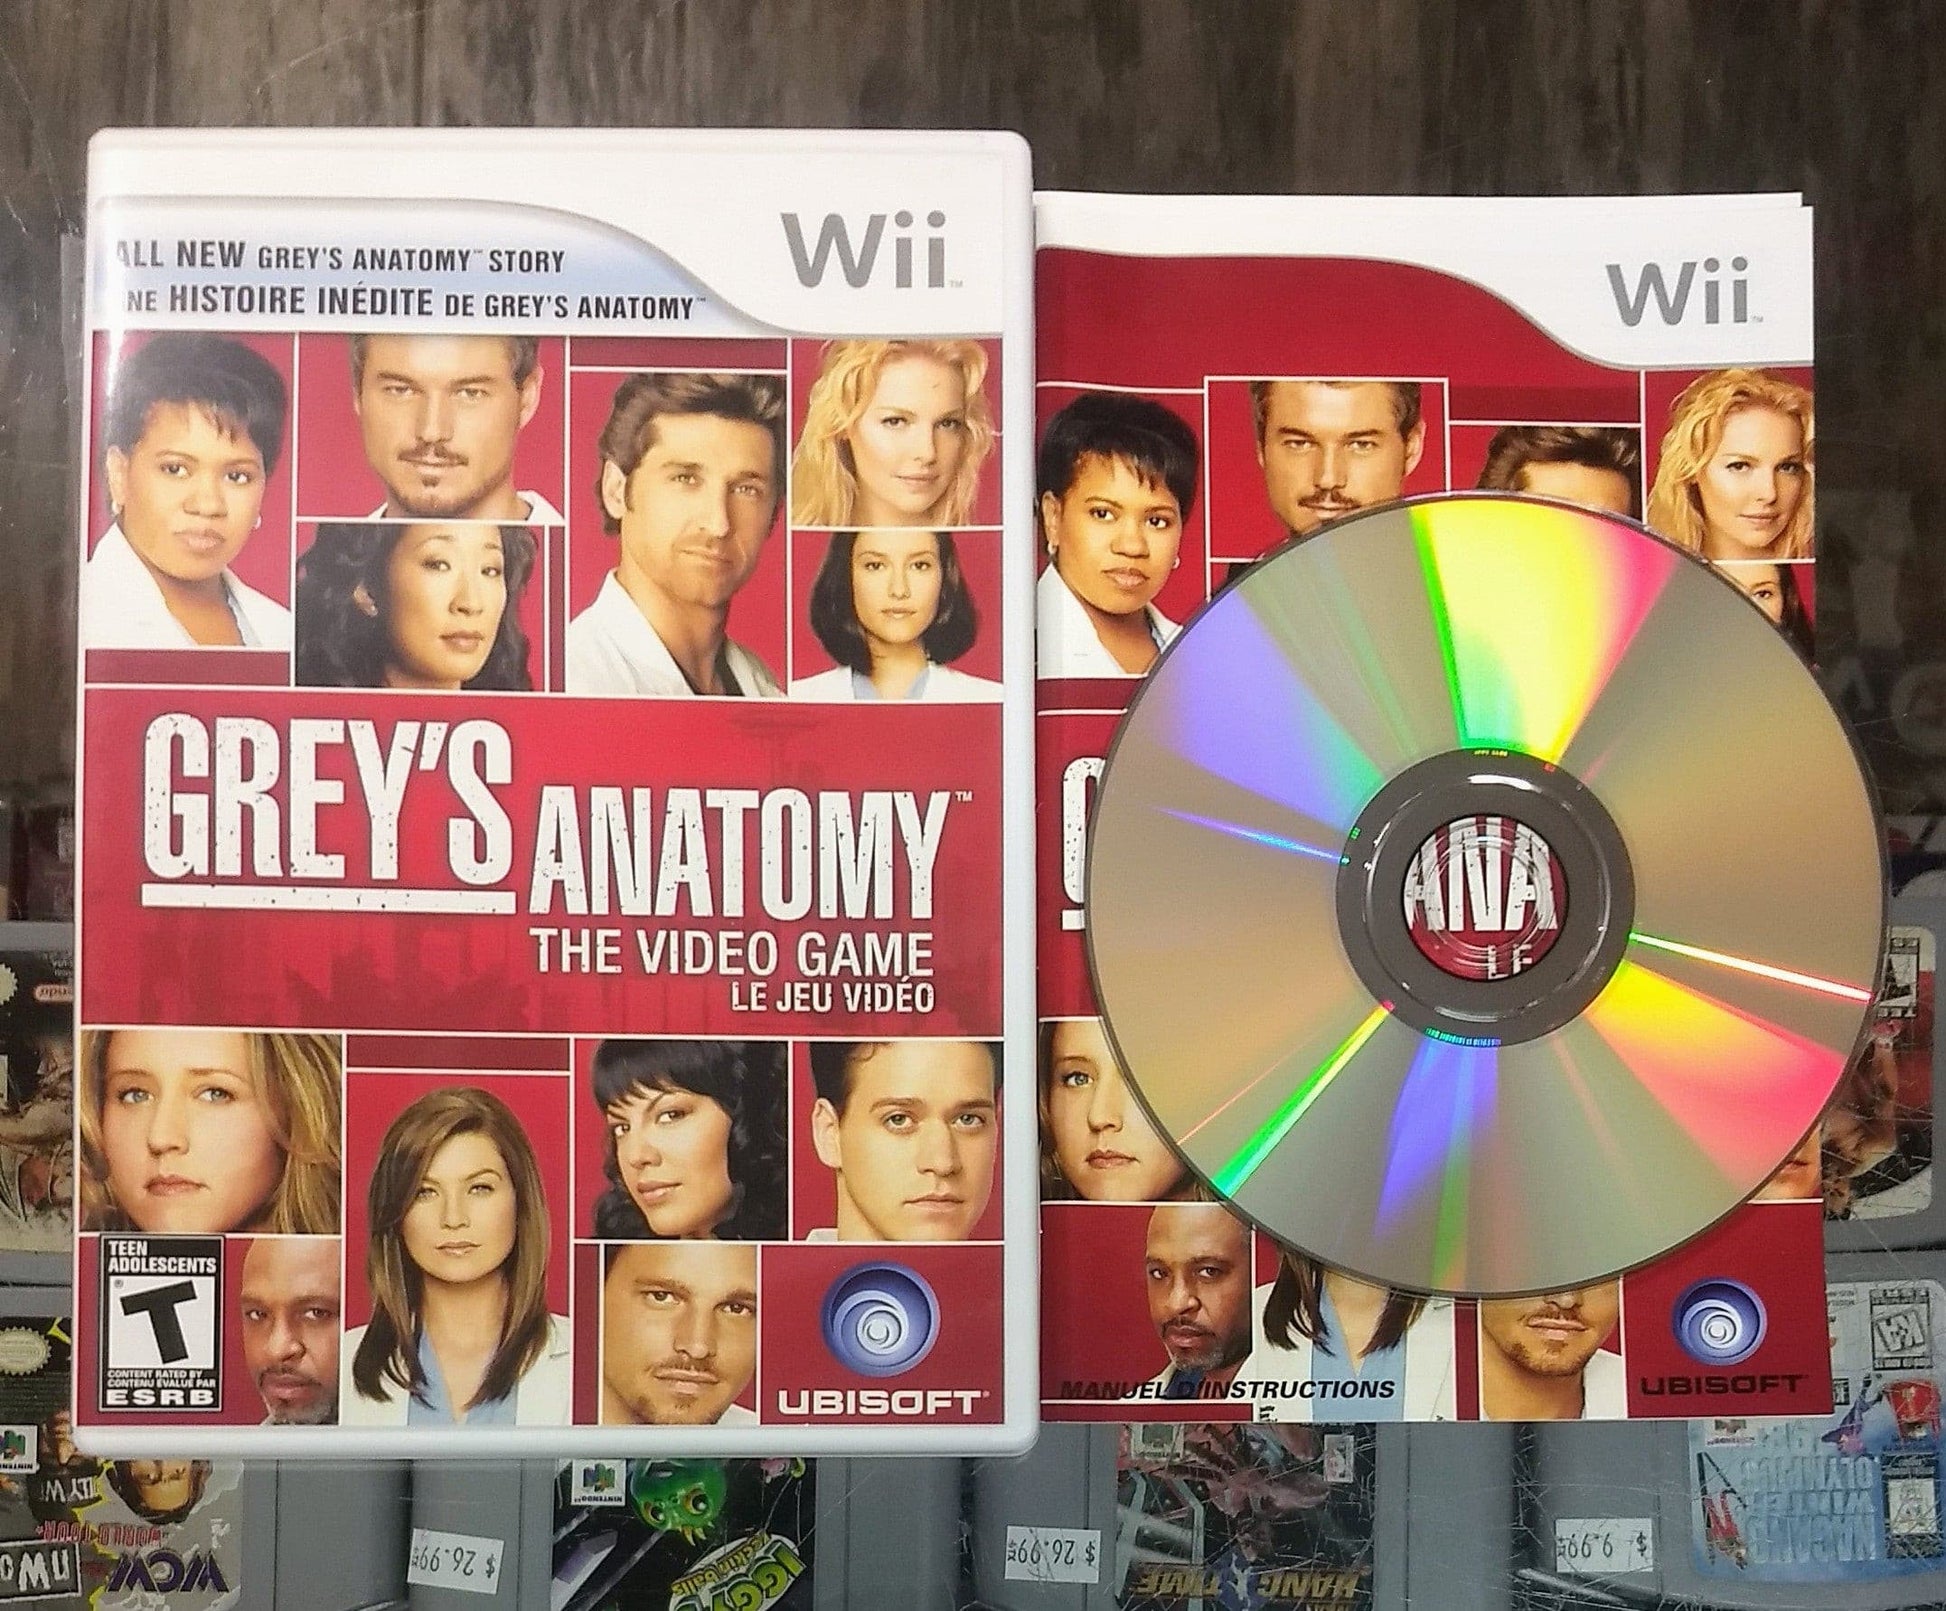 GREY'S ANATOMY THE VIDEO GAME NINTENDO WII - jeux video game-x